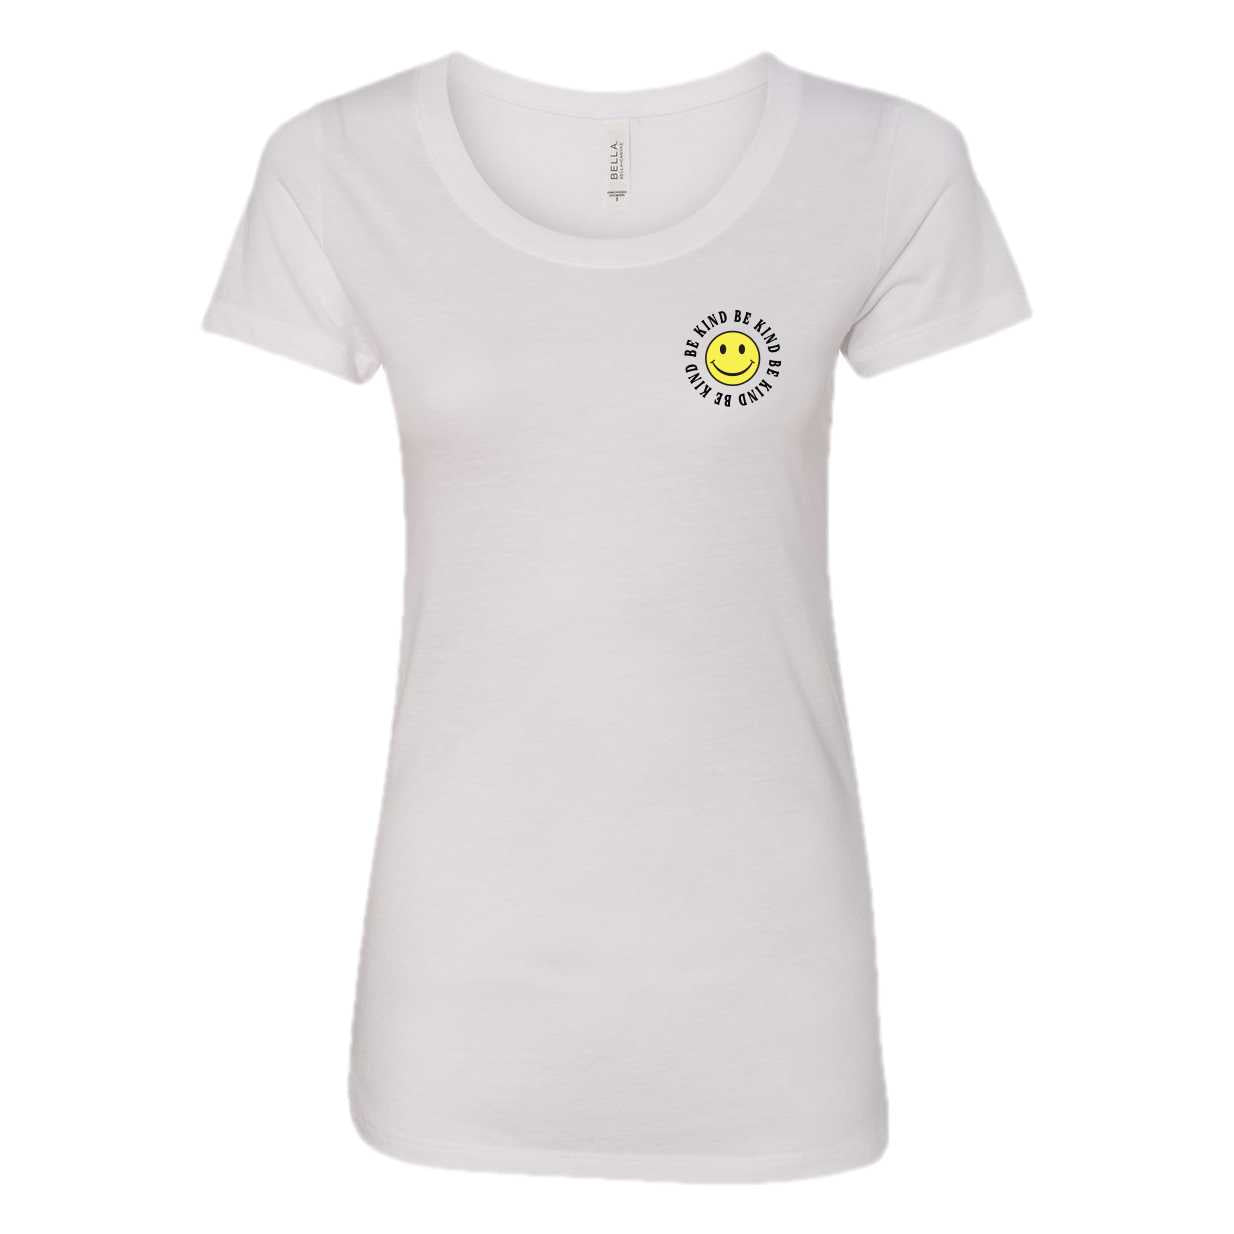 'Smiley Be Kind' Women's White Tee S&S Activeware